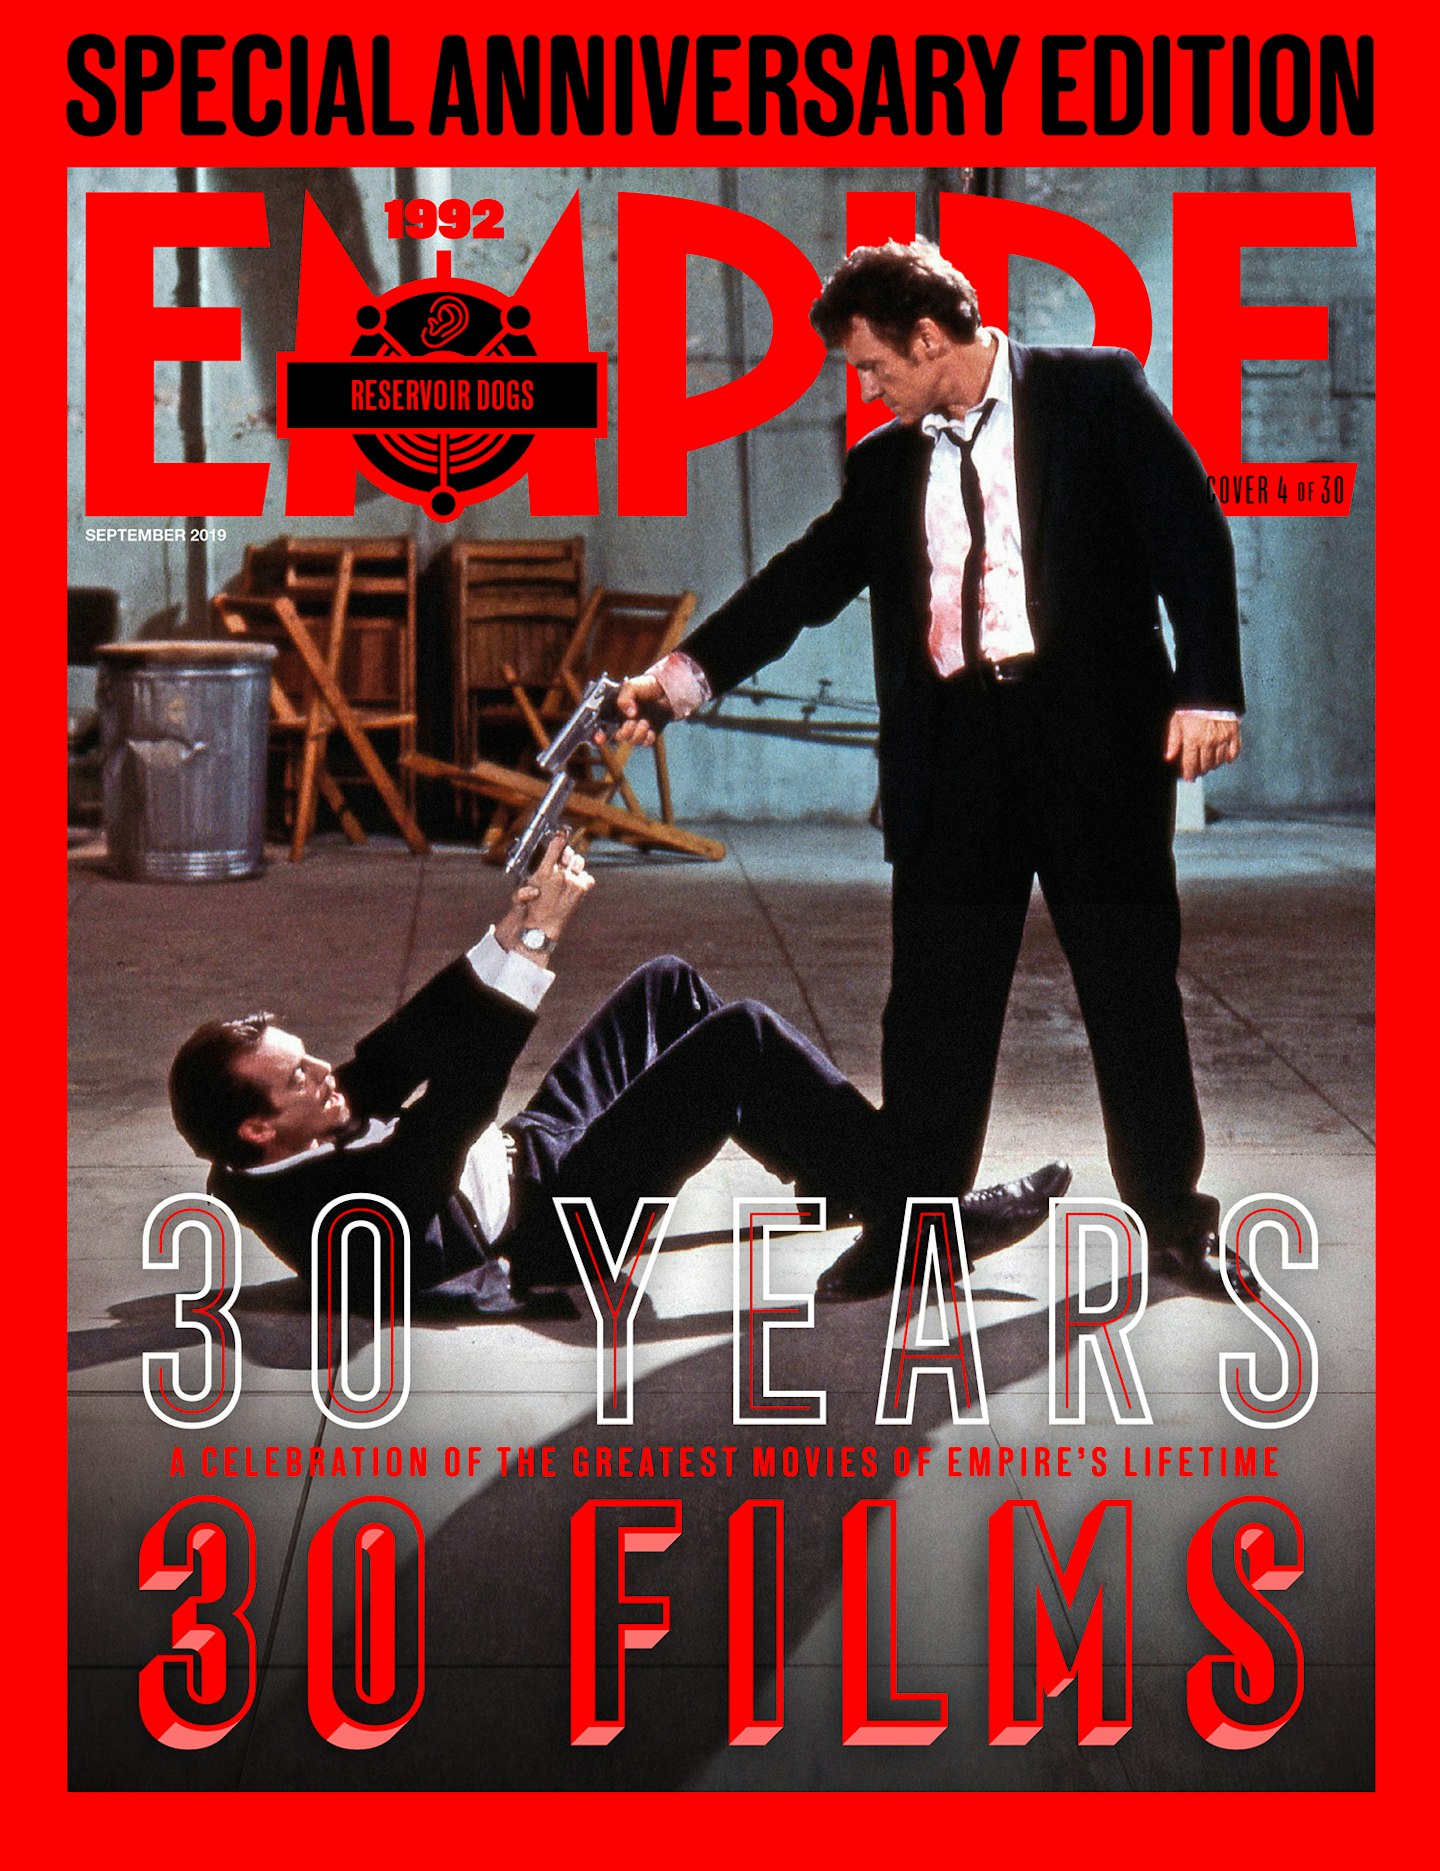 Empire's 30th Anniversary Edition Covers – Reservoir Dogs